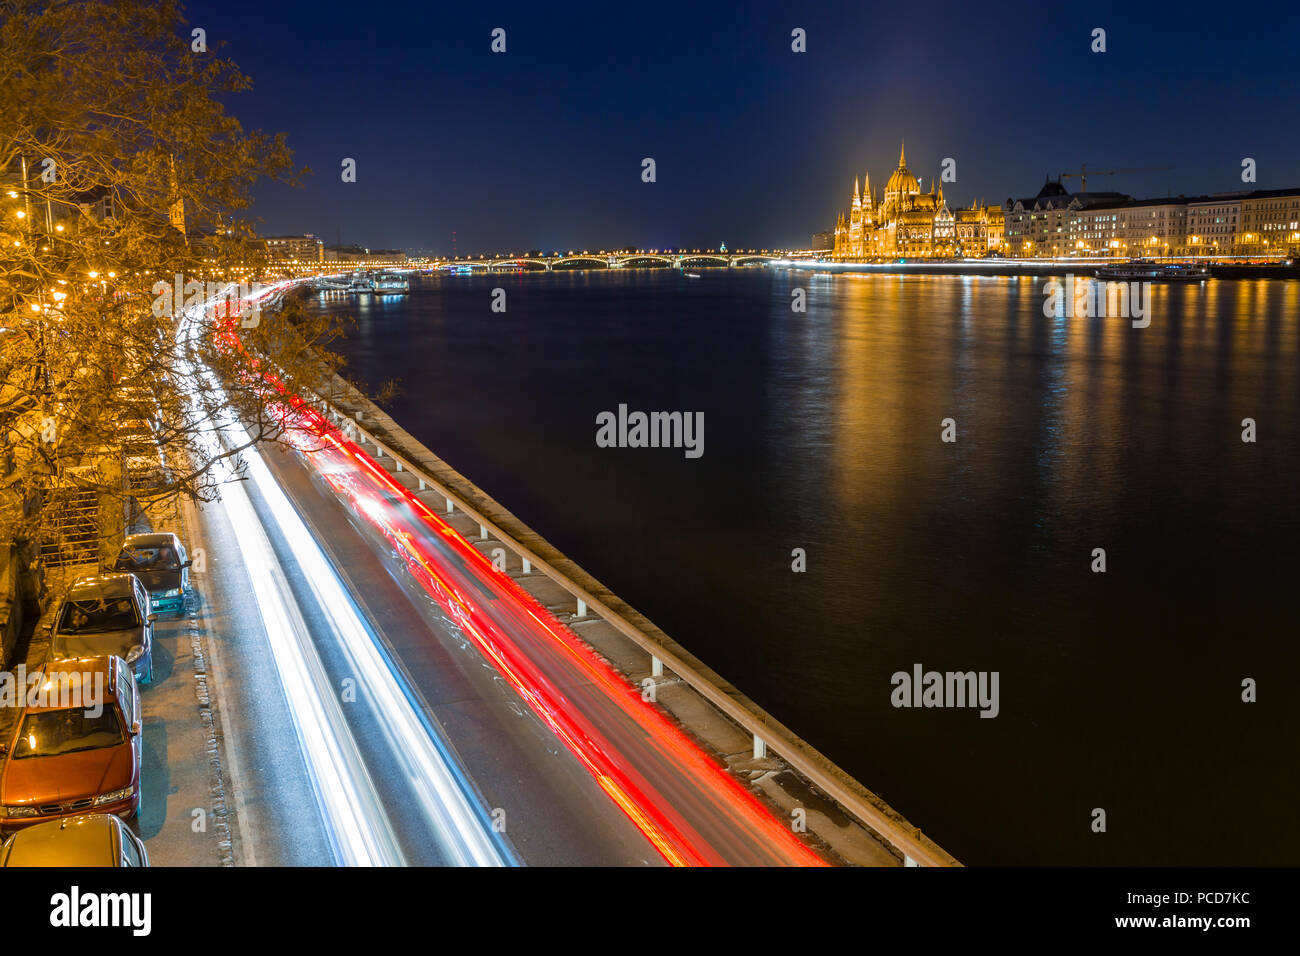 Trail lights along River Danube and Hungarian Parliament Building at night, Budapest, Hungary, Europe Stock Photo